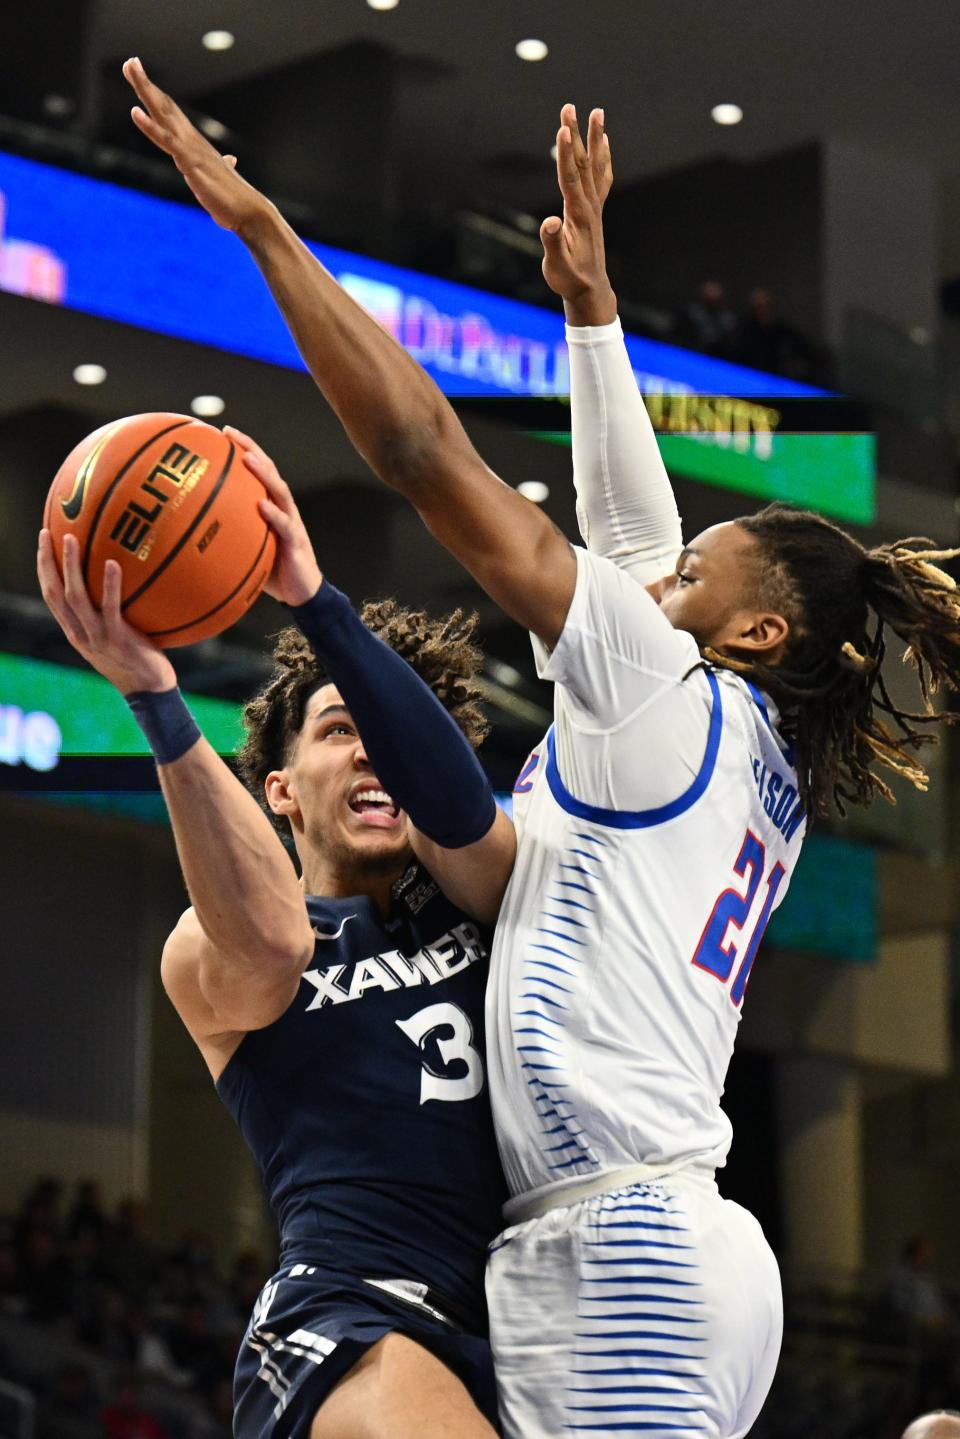 Xavier's men's basketball team got upset on Jan. 18 against DePaul at Wintrust Arena. The rematch is on Saturday at Cintas Center.